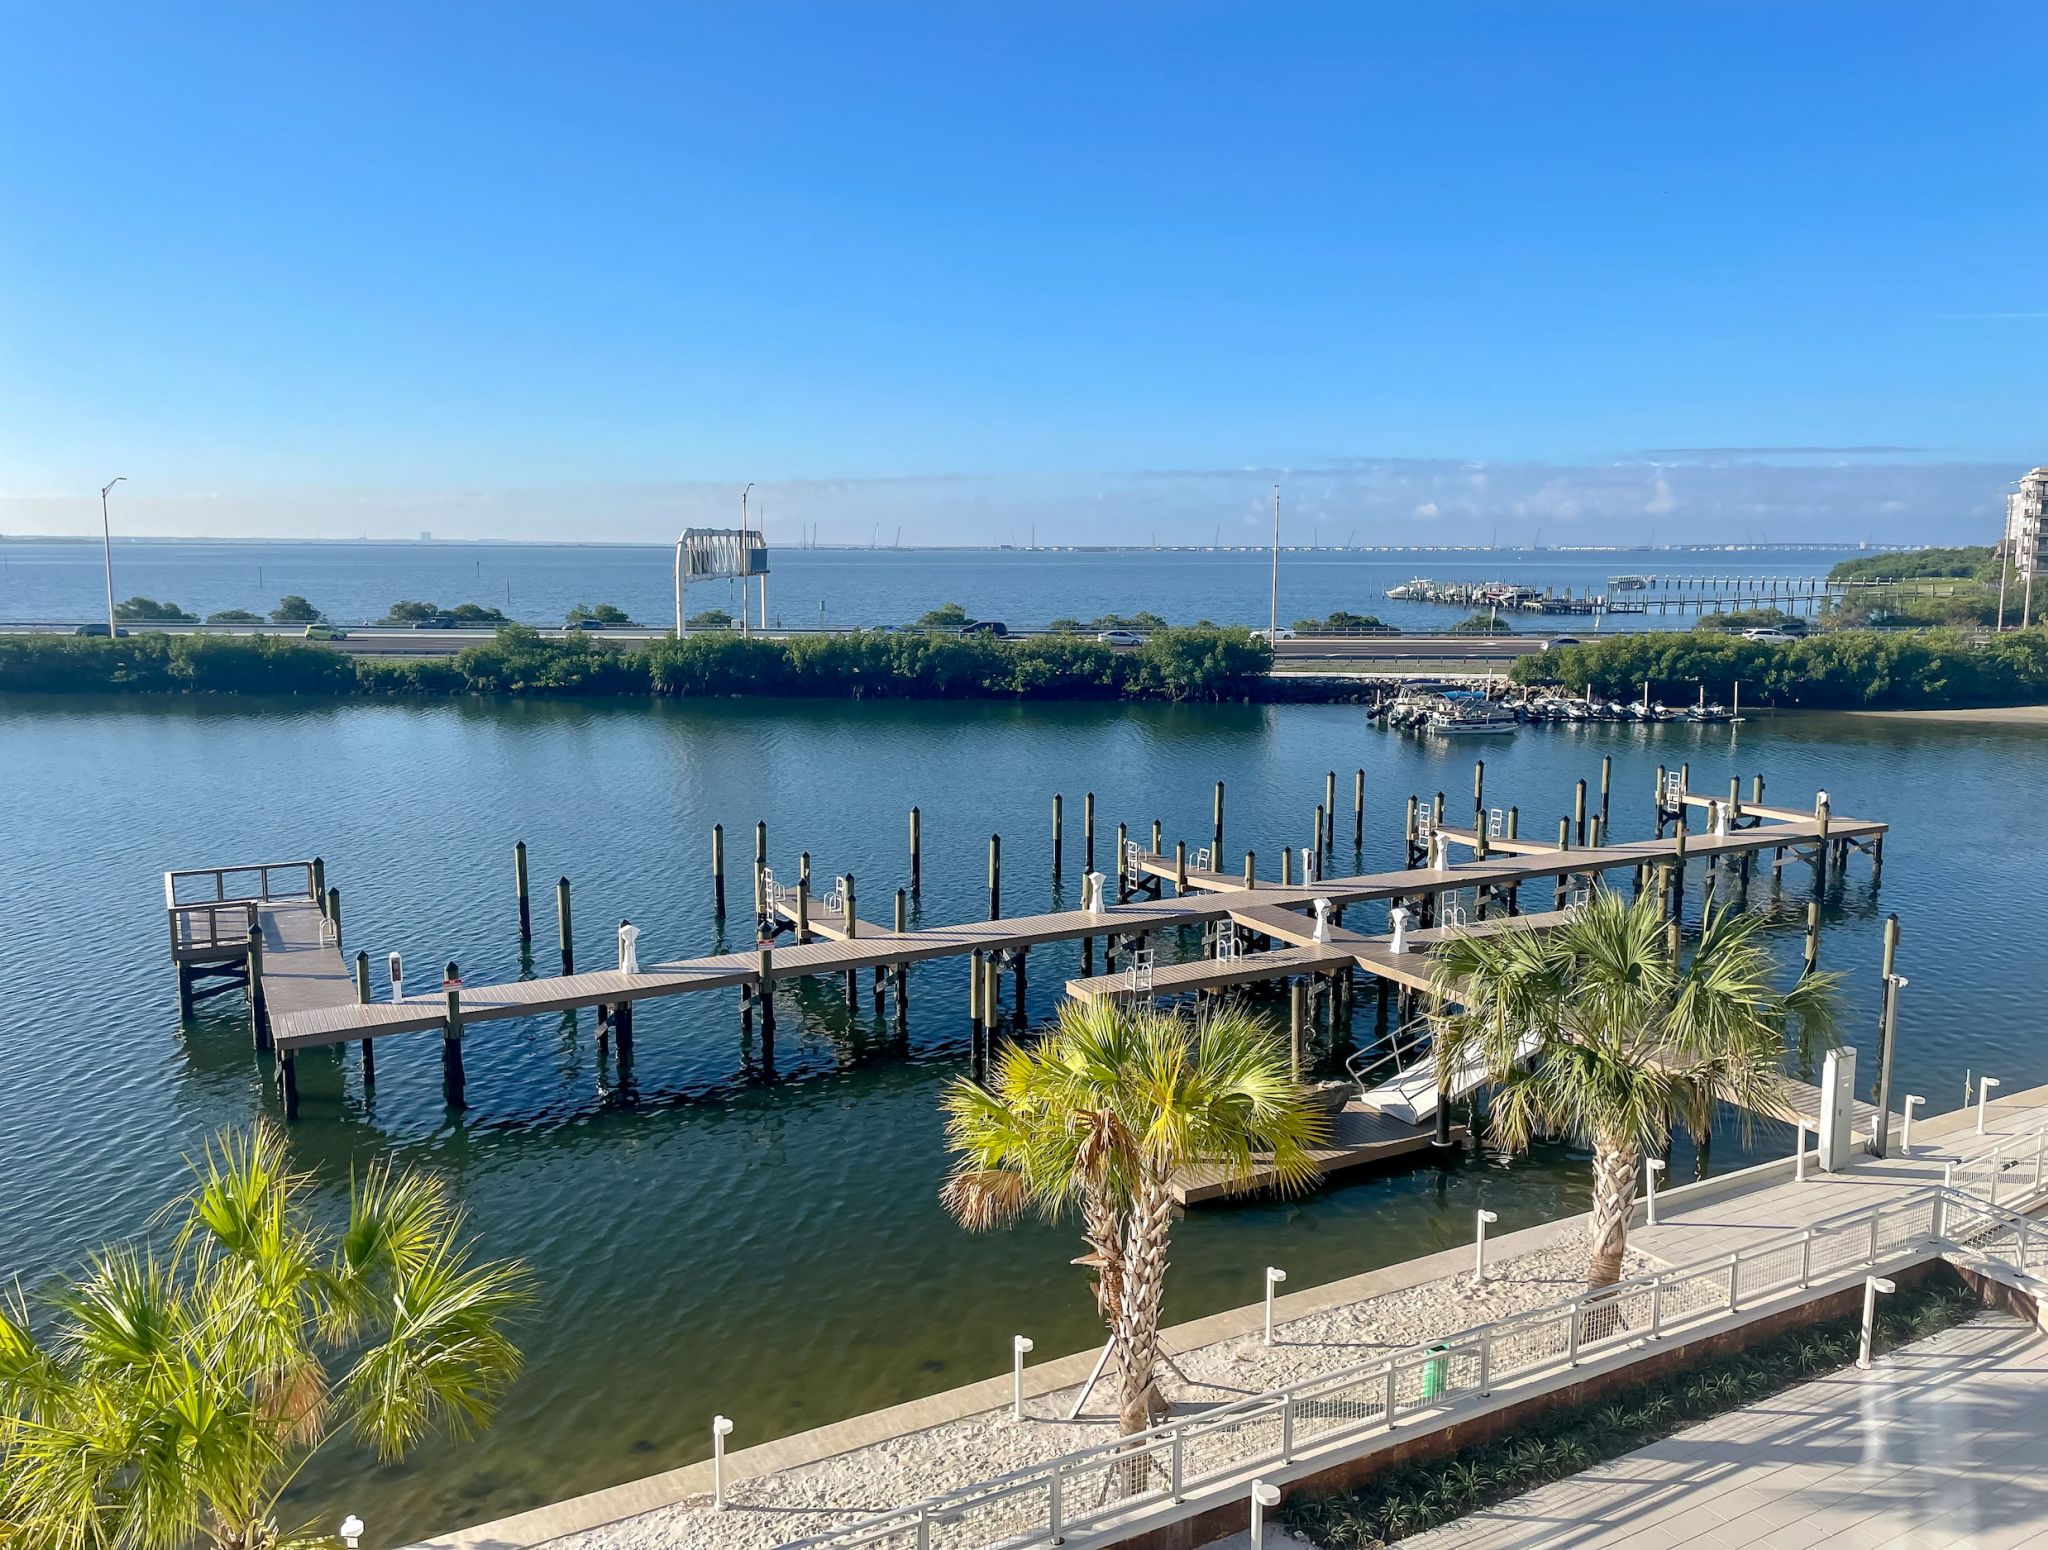 The Emerson Port, a 12 slip boat dock on Tampa Bay